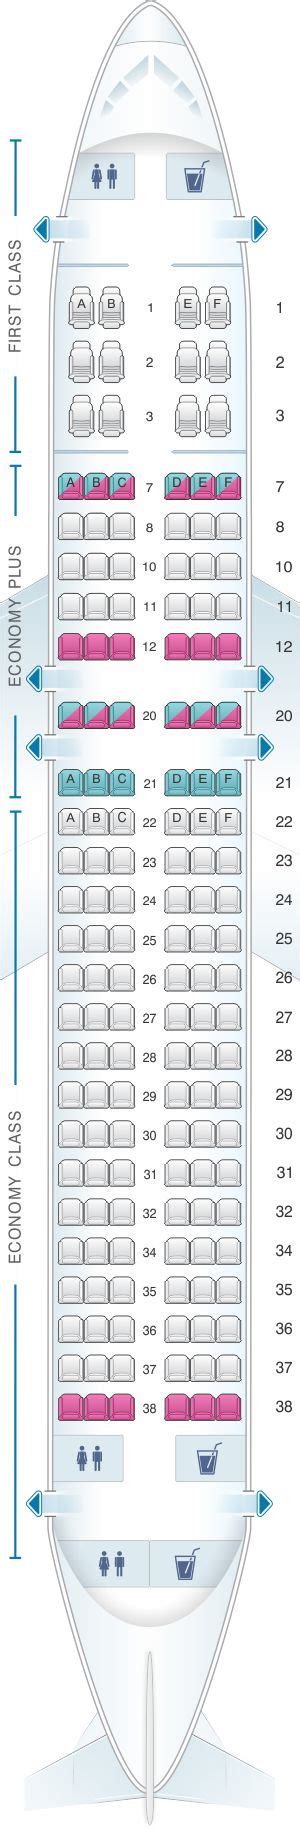 Seat Map United Airlines Airbus A320 Alitalia Airlines Mapas Jorge